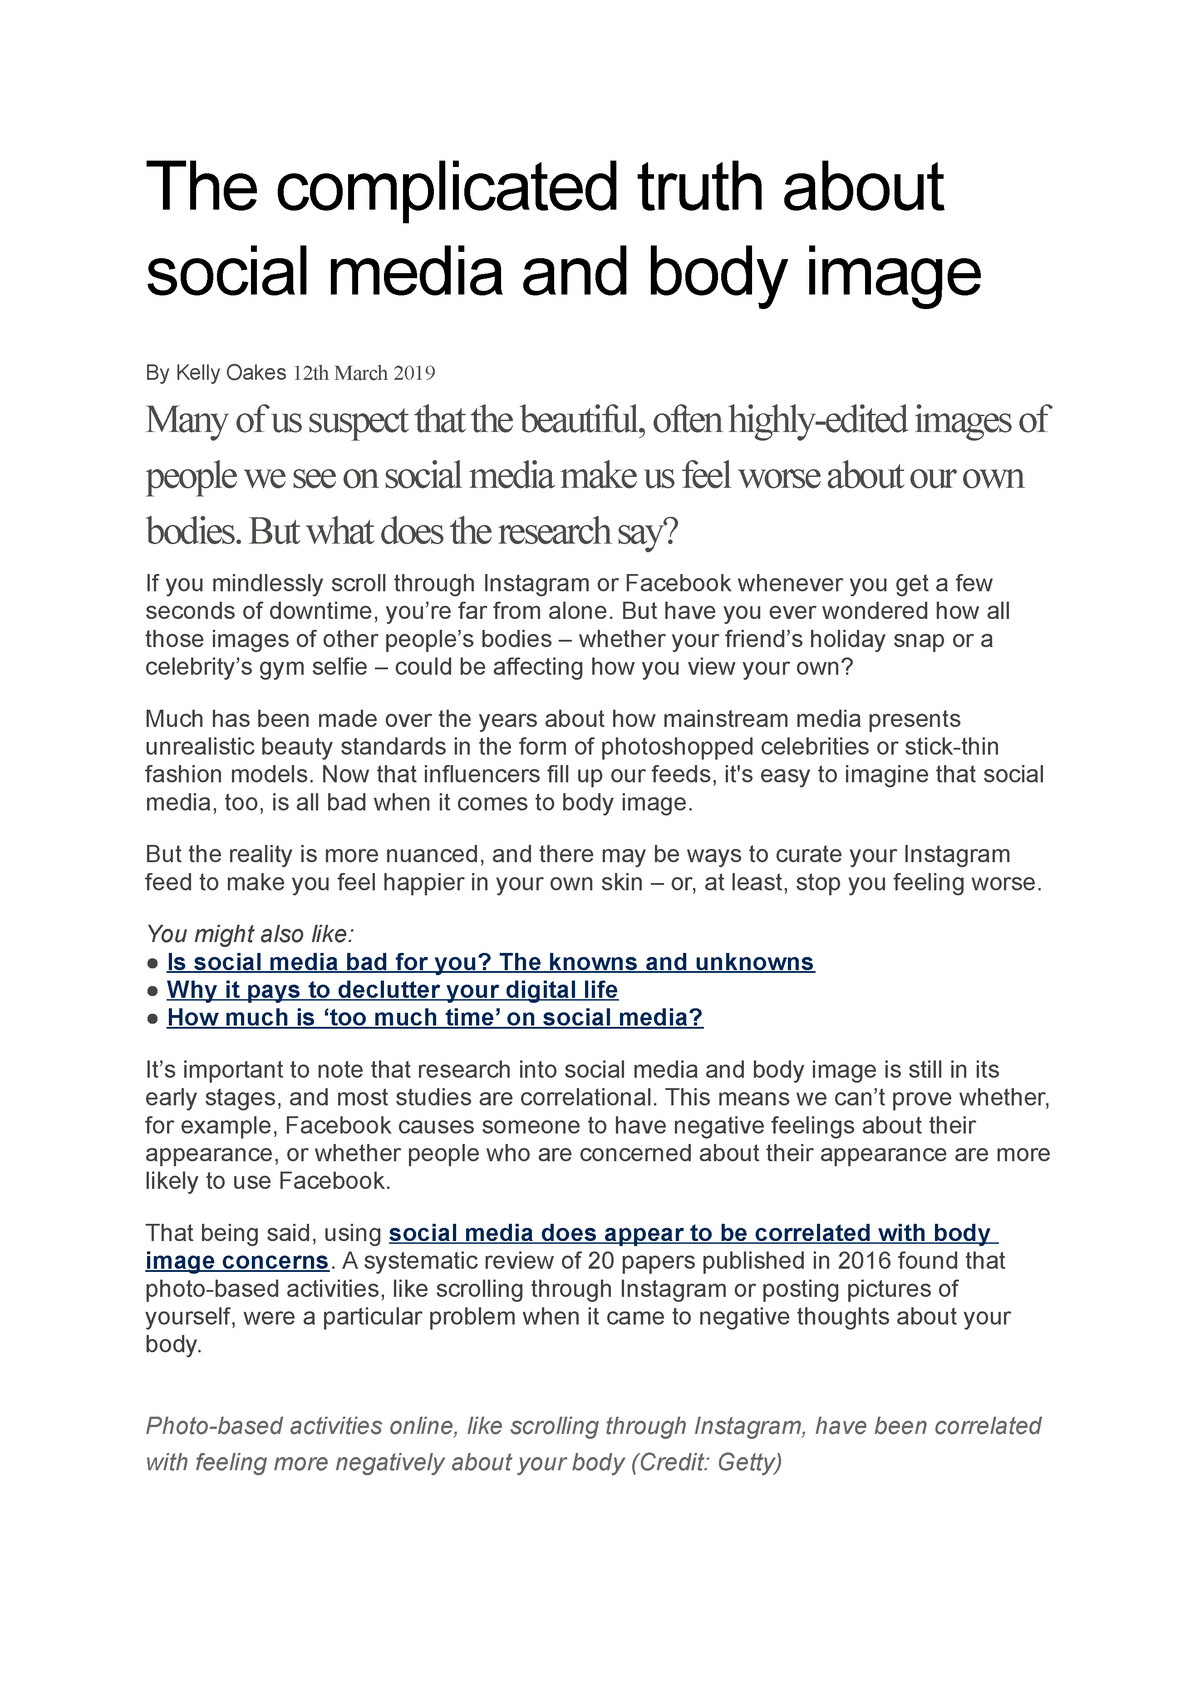 essay on body image and social media